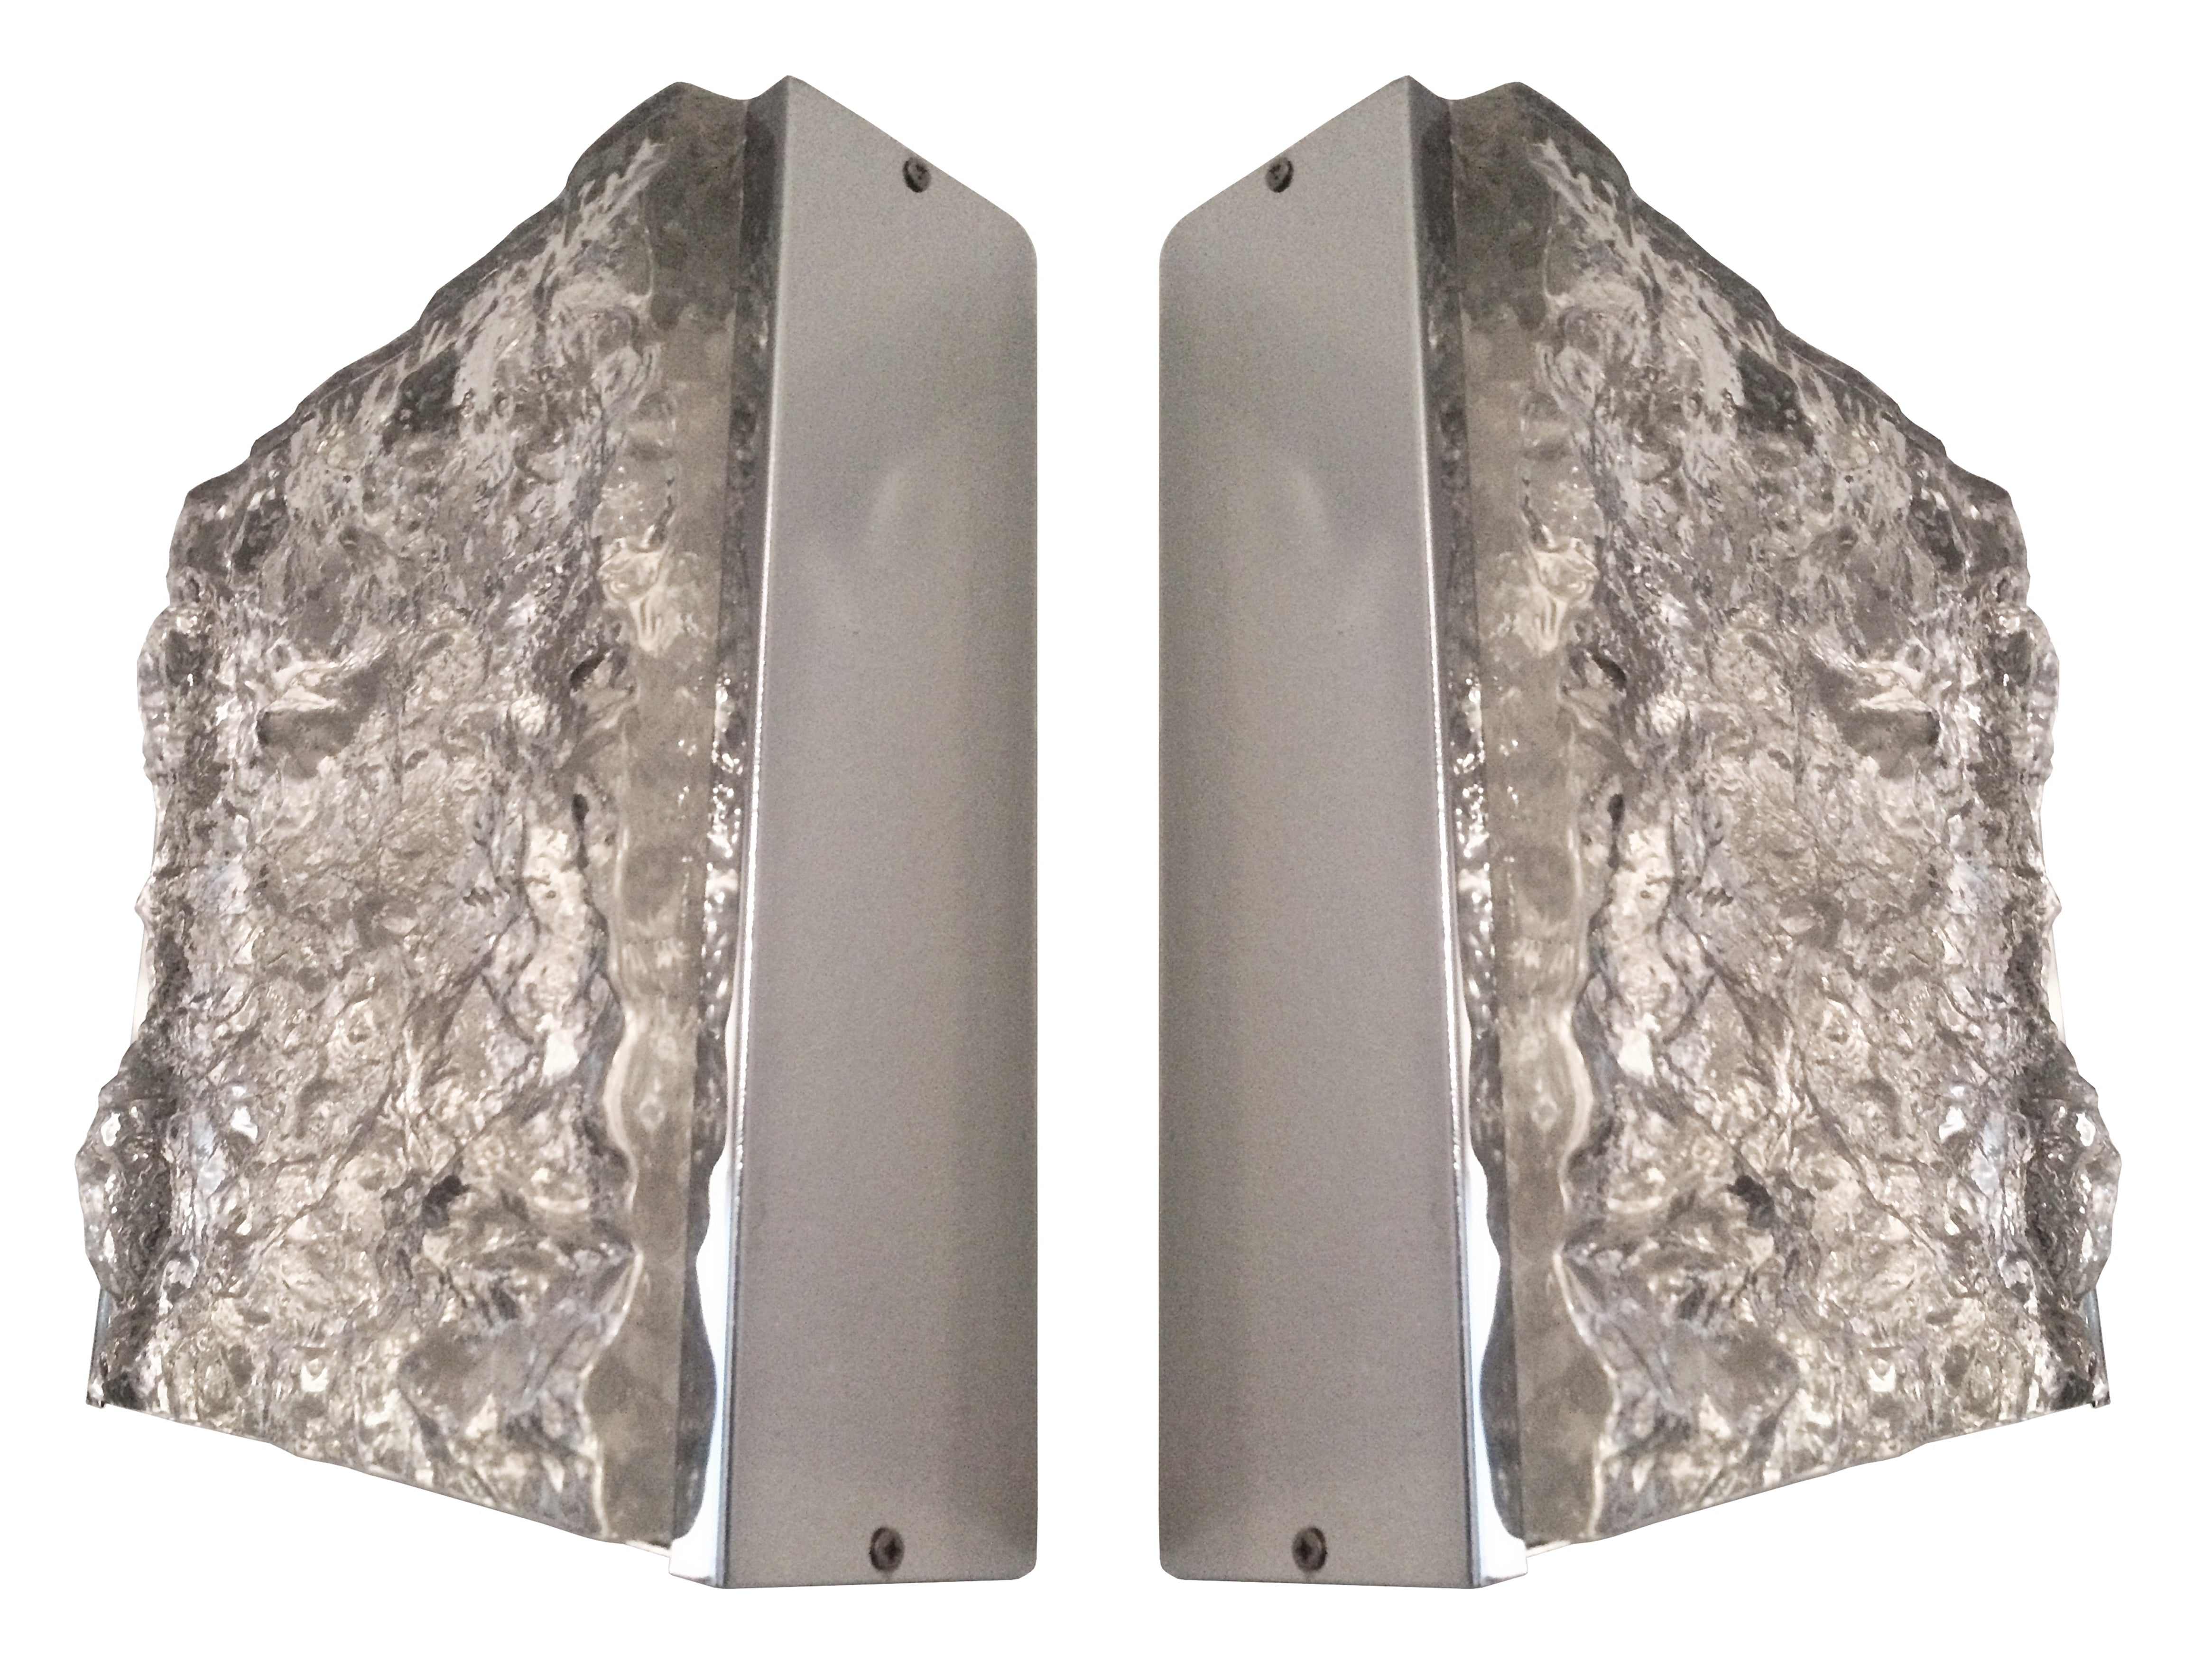 Pair of Italian Camer Glass Wall Sconces by Mazzega